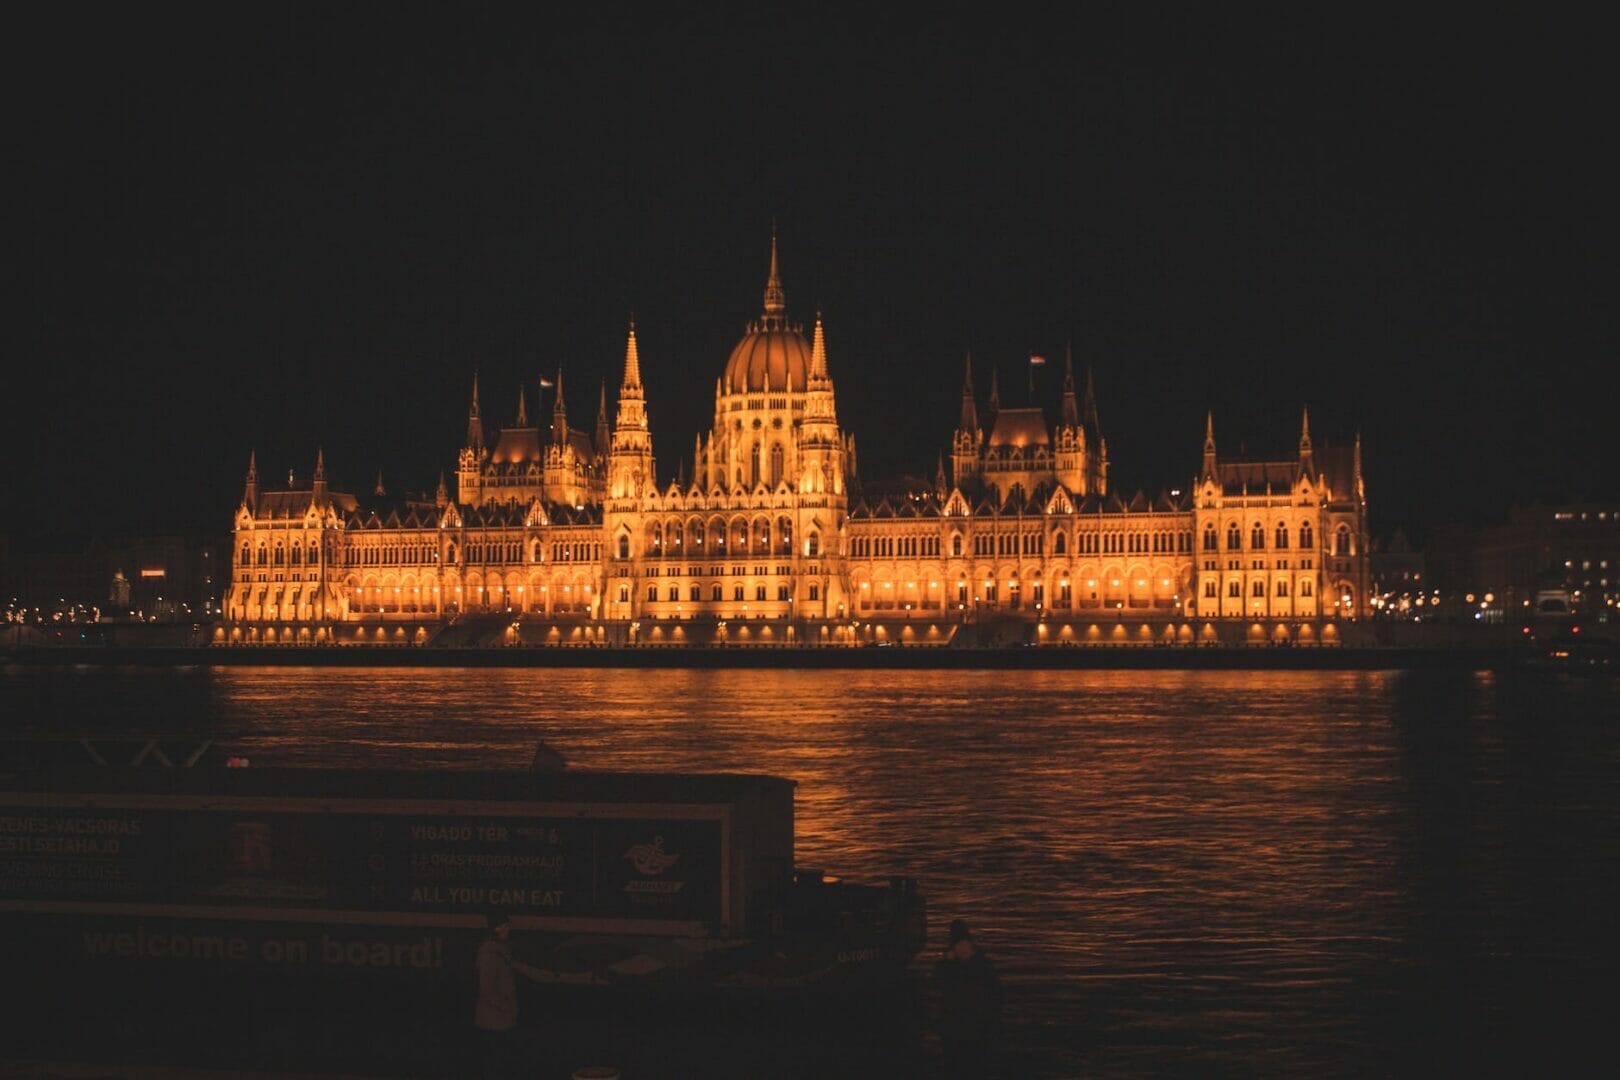 majestic palace building glowing at night - Hungarian parliament